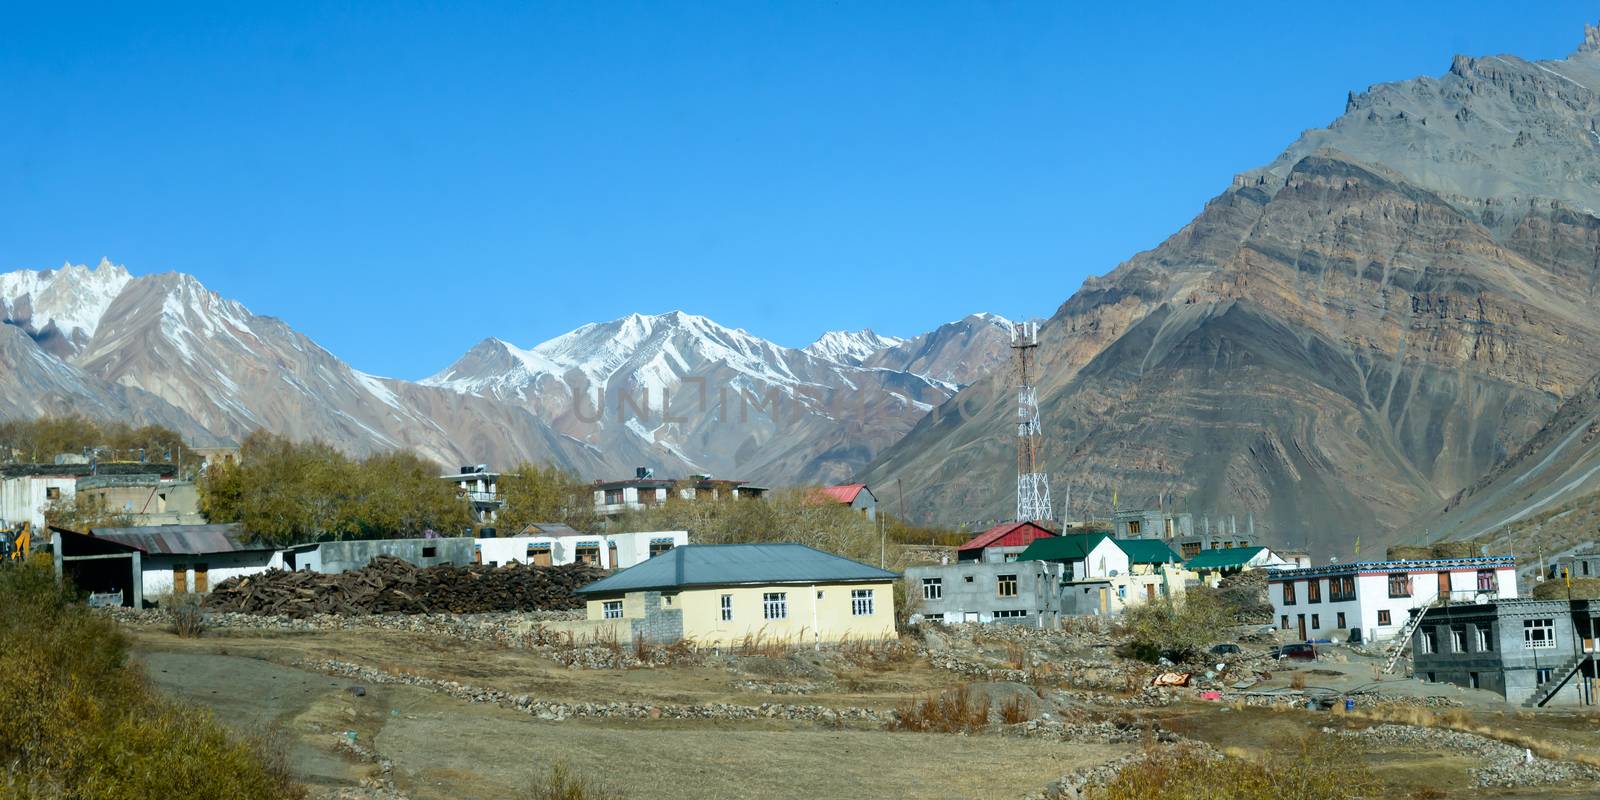 Village at Foothill of Himalayas. Small Villages In The Foothills Of Himalayan picturesque valley. A beautiful indian landscape of a town city at foothills of snow capped Mountain ranges. Kaza India by sudiptabhowmick